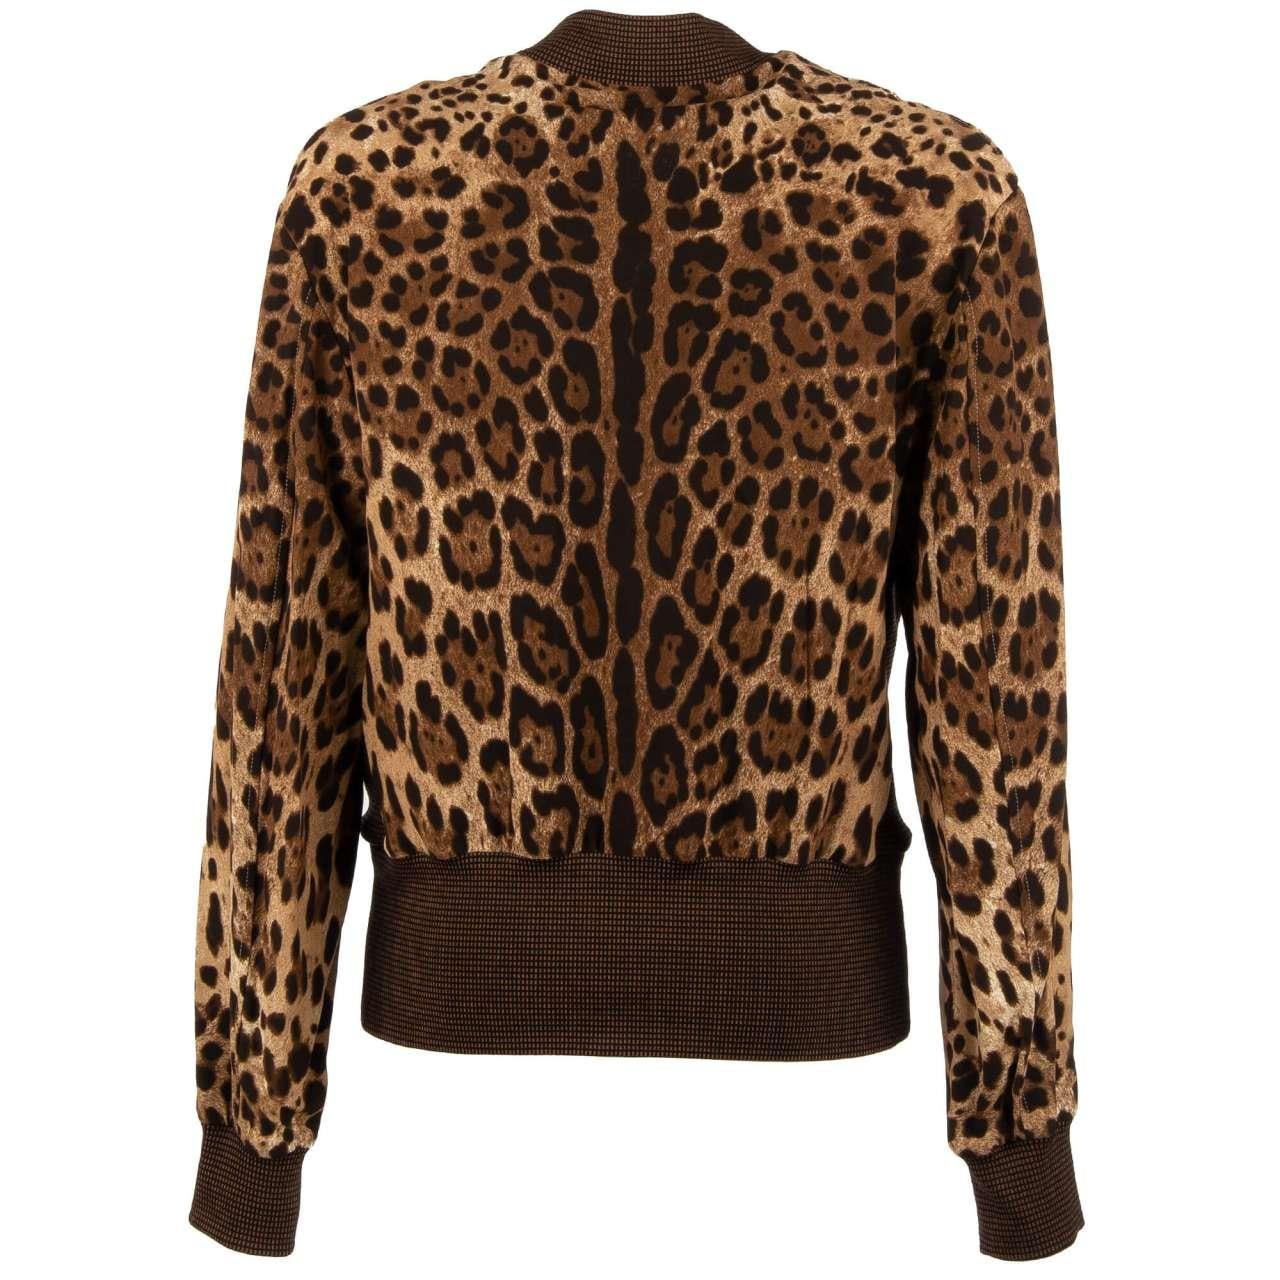 - Leopard printed bomber jacket with SNEAK PEEK Patch, pockets and knit and leather details by DOLCE & GABBANA - New with tag - Wide Fit - MADE IN ITALY - Model: G9QR0Z-G7WCT-HY13M - Material: 90% Viscose, 5% Lambskin, 5% Elastan - Lining: 100%